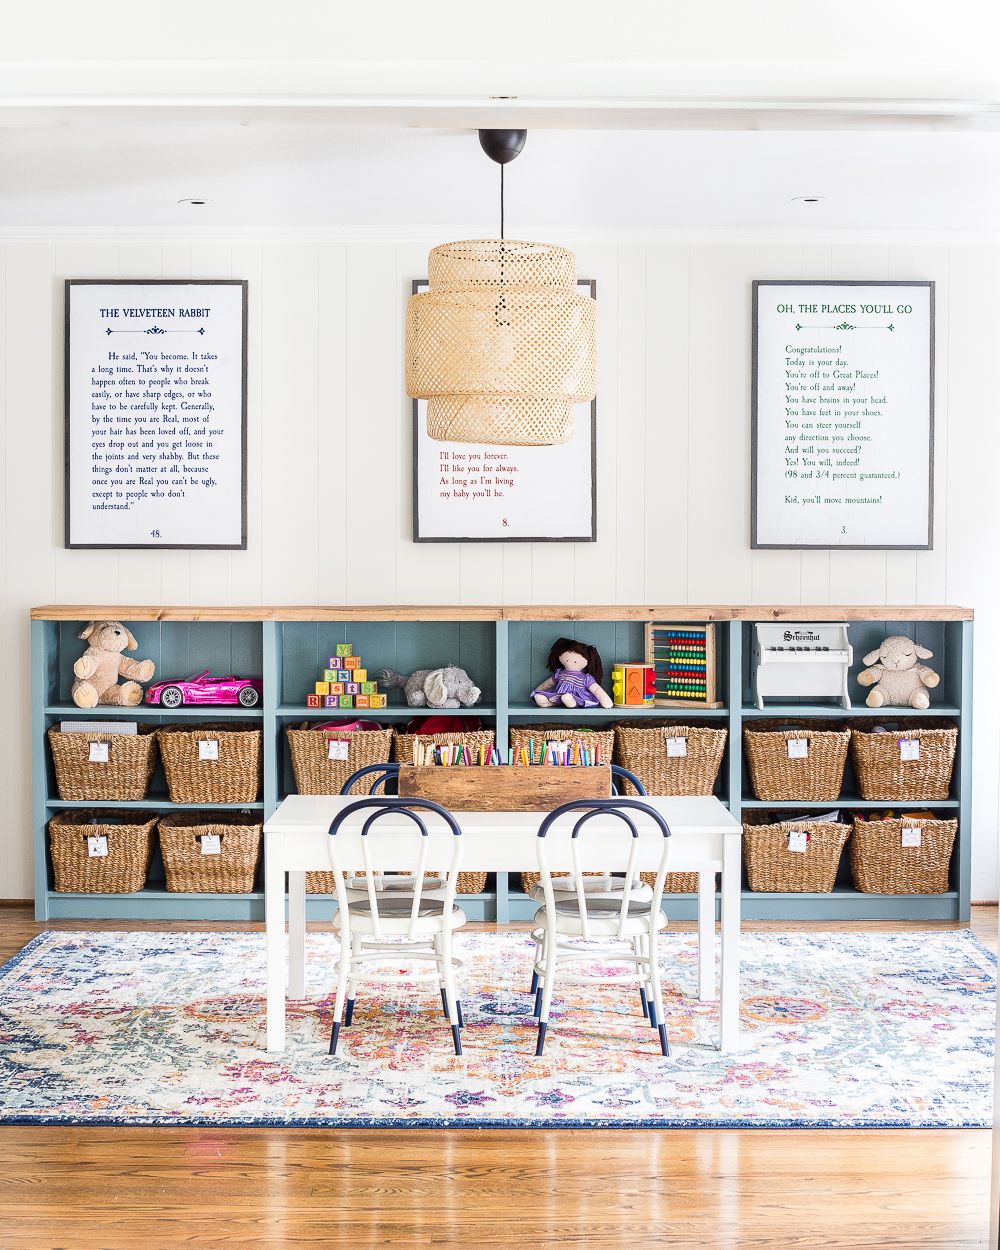 toy organizer for small spaces